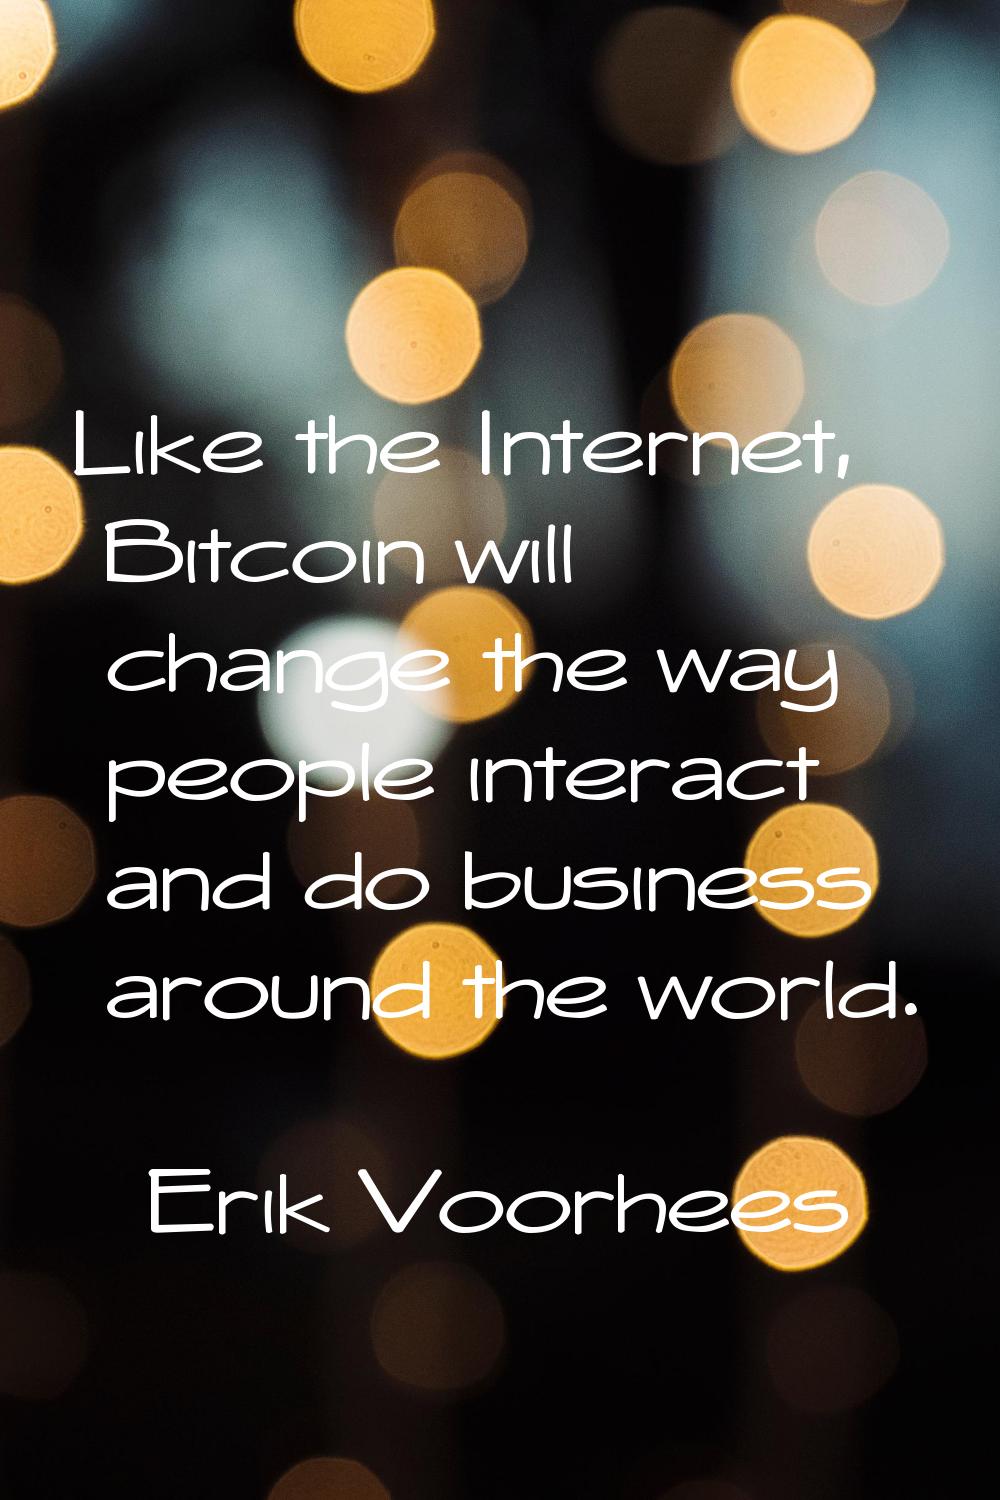 Like the Internet, Bitcoin will change the way people interact and do business around the world.